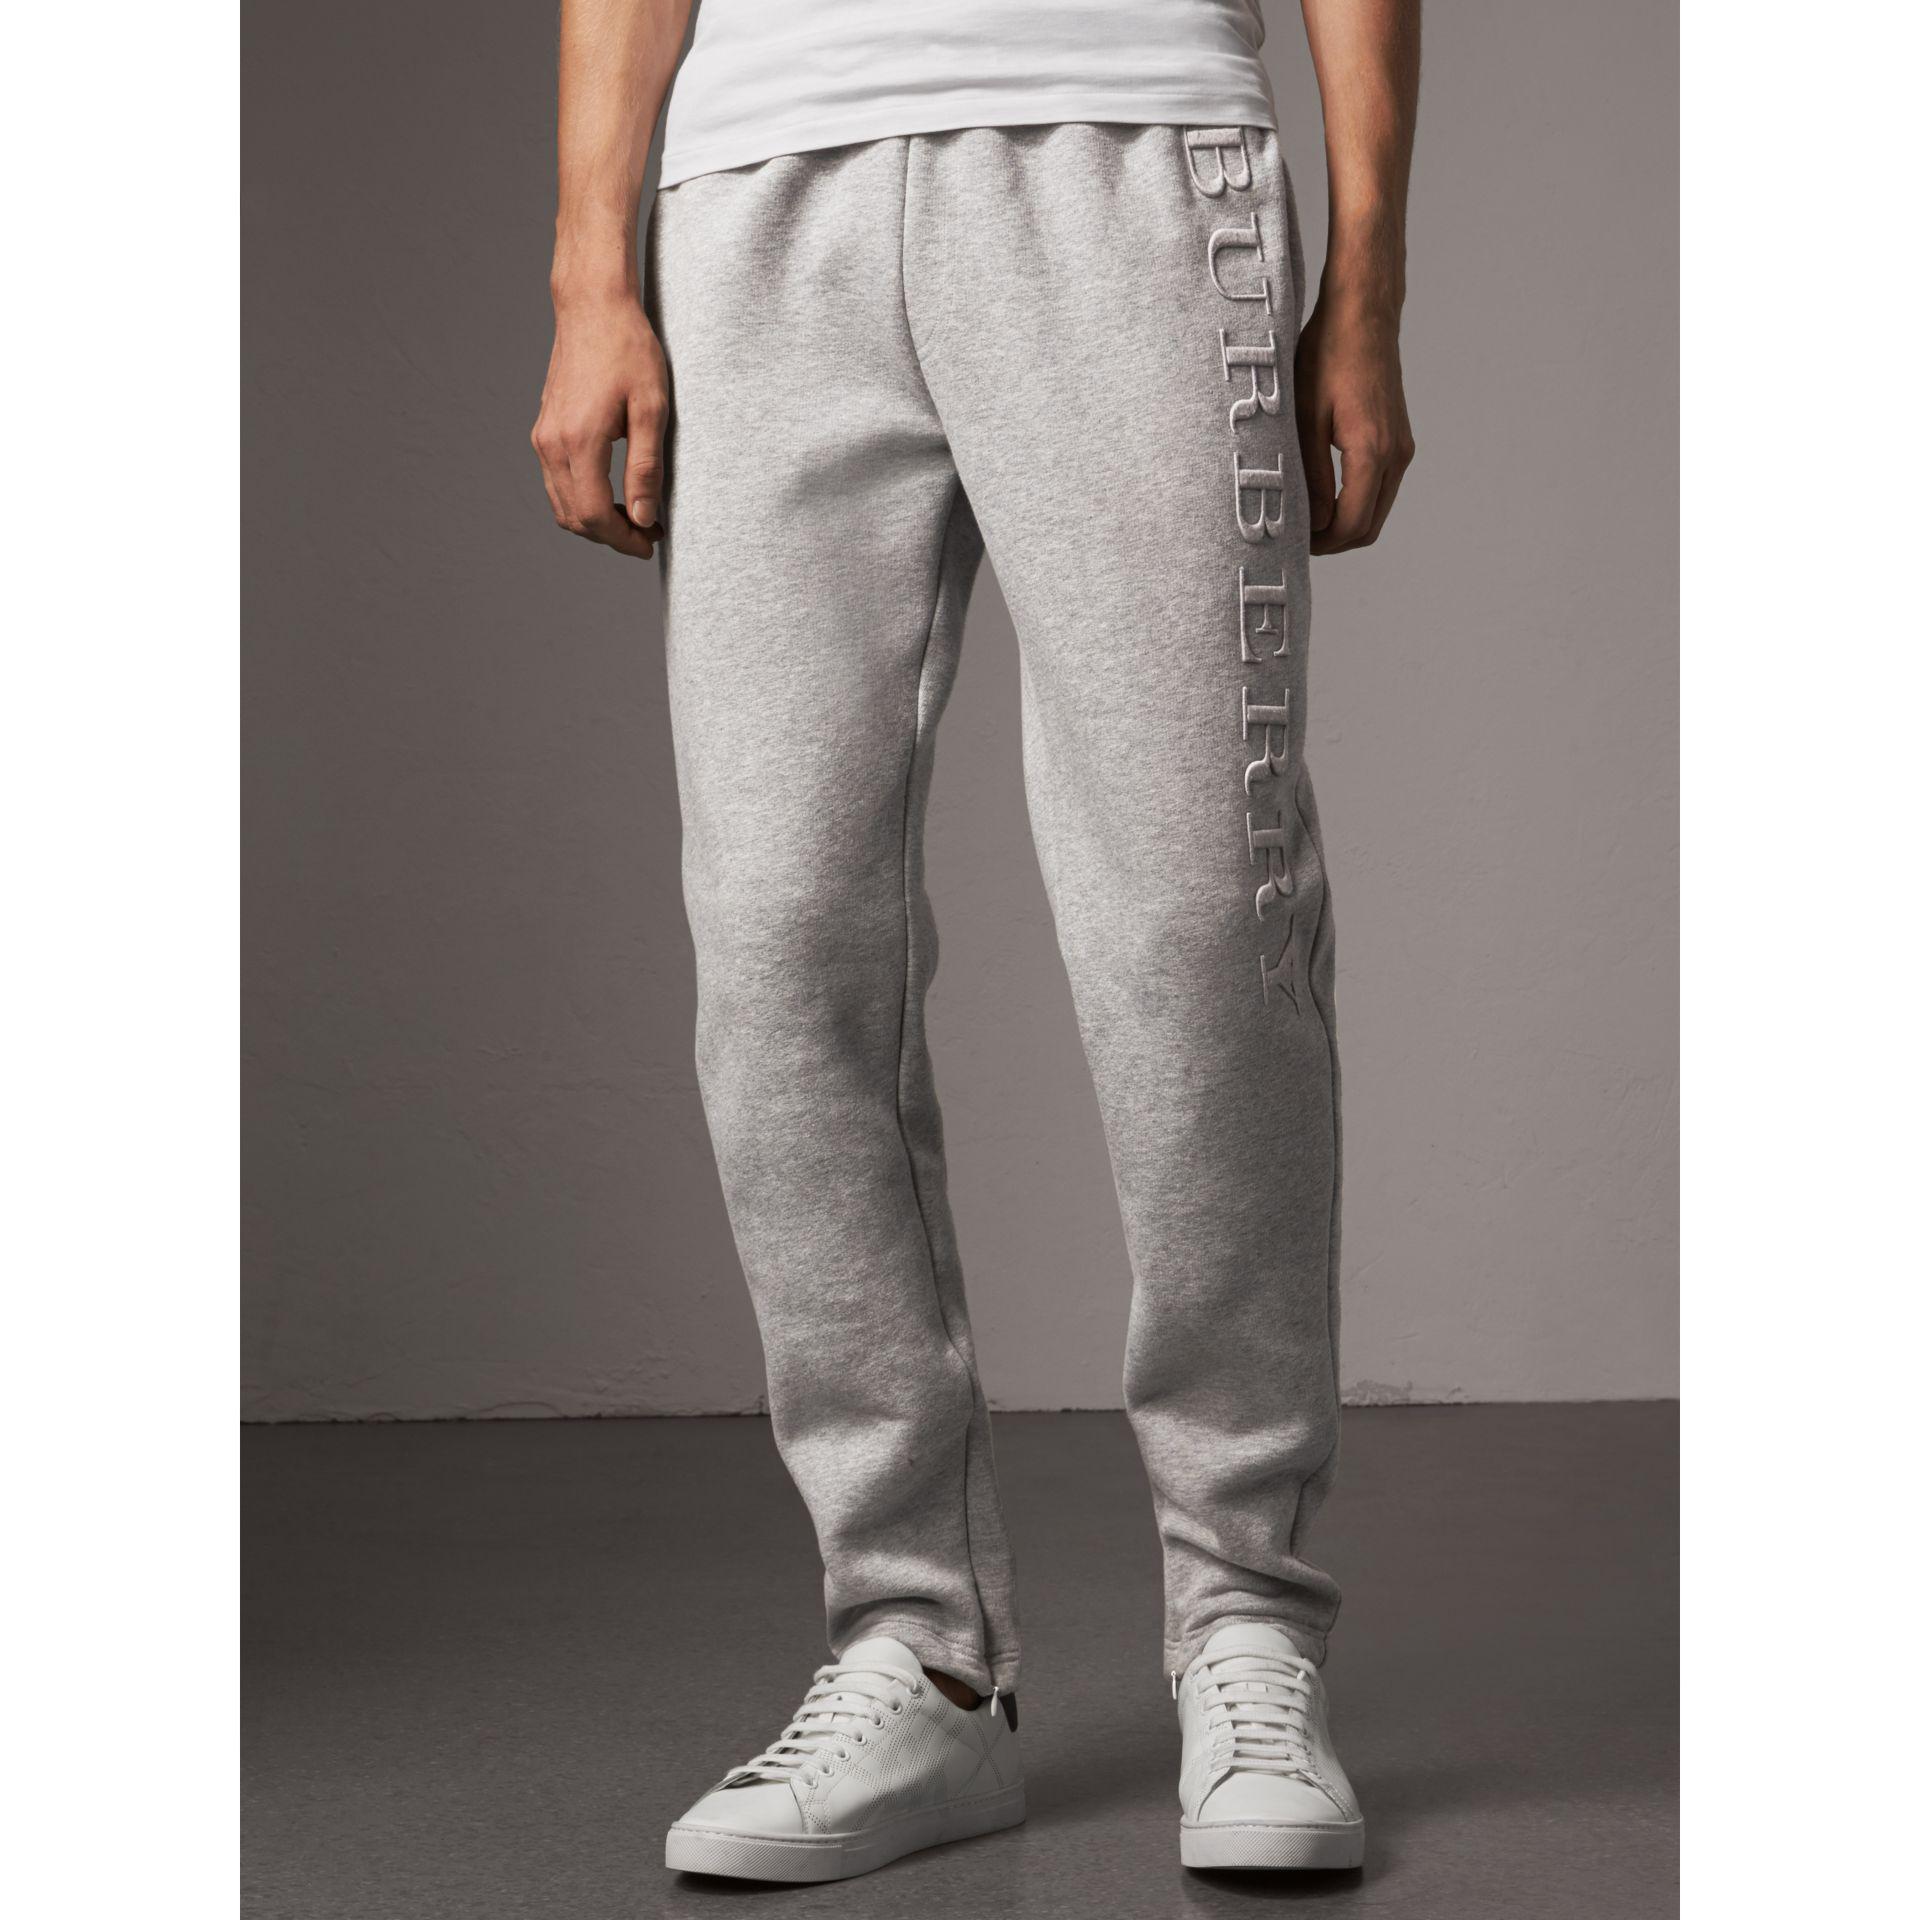 Burberry Embroidered Jersey Sweatpants in Pale Grey Melange (Grey) for Men  - Lyst